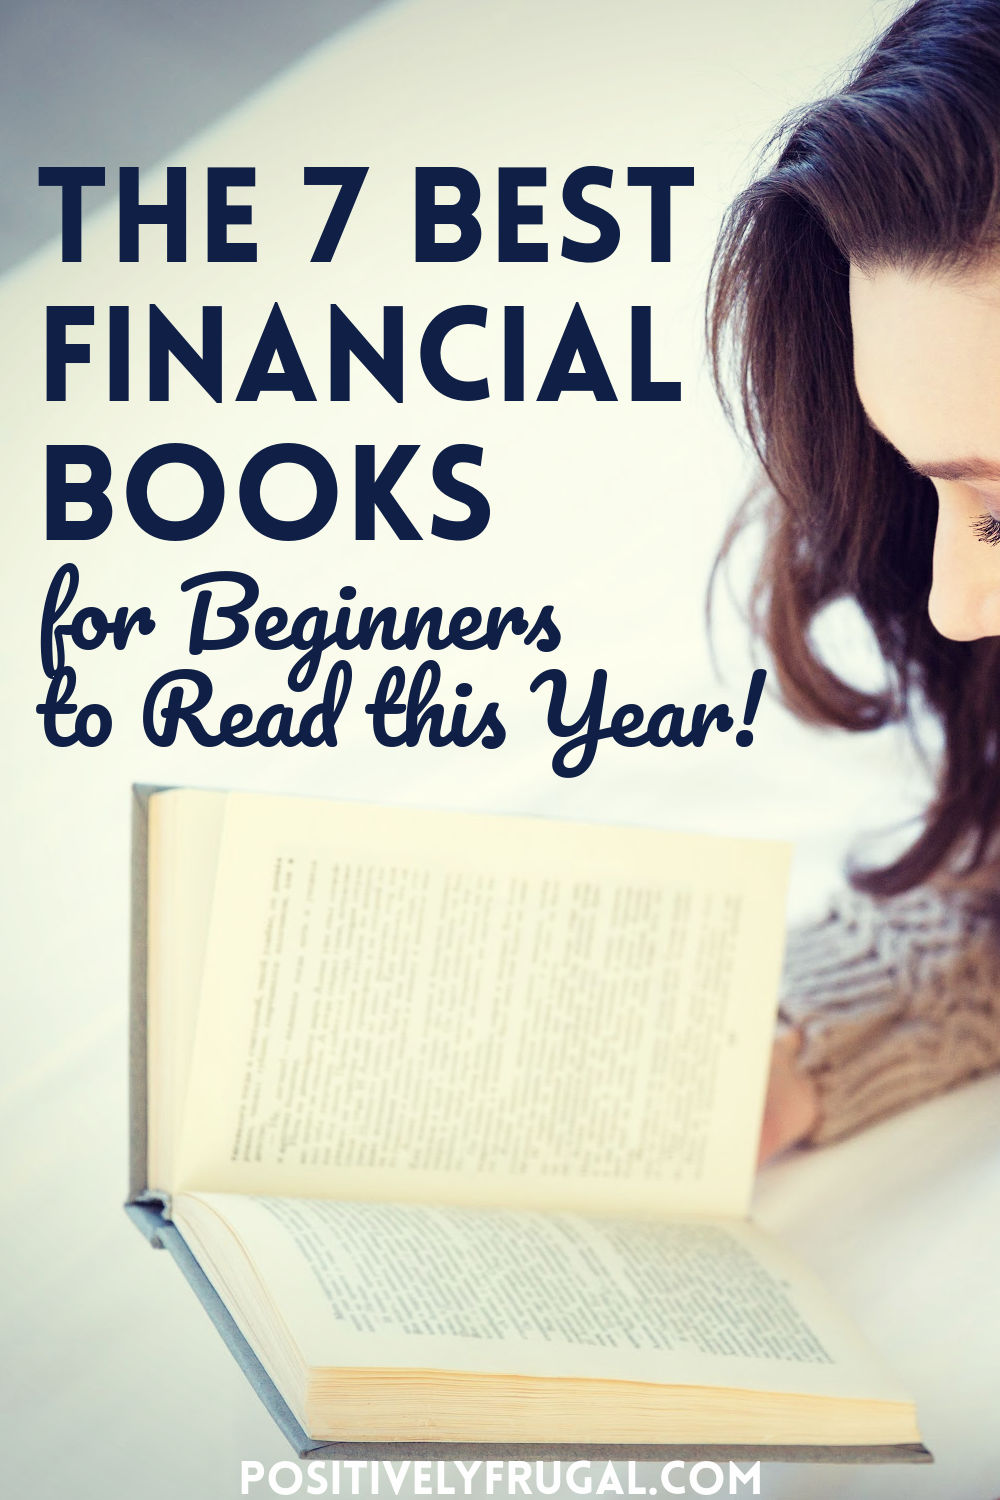 The 7 Best Financial Books for Beginners to Read this Year by PositivelyFrugal.com